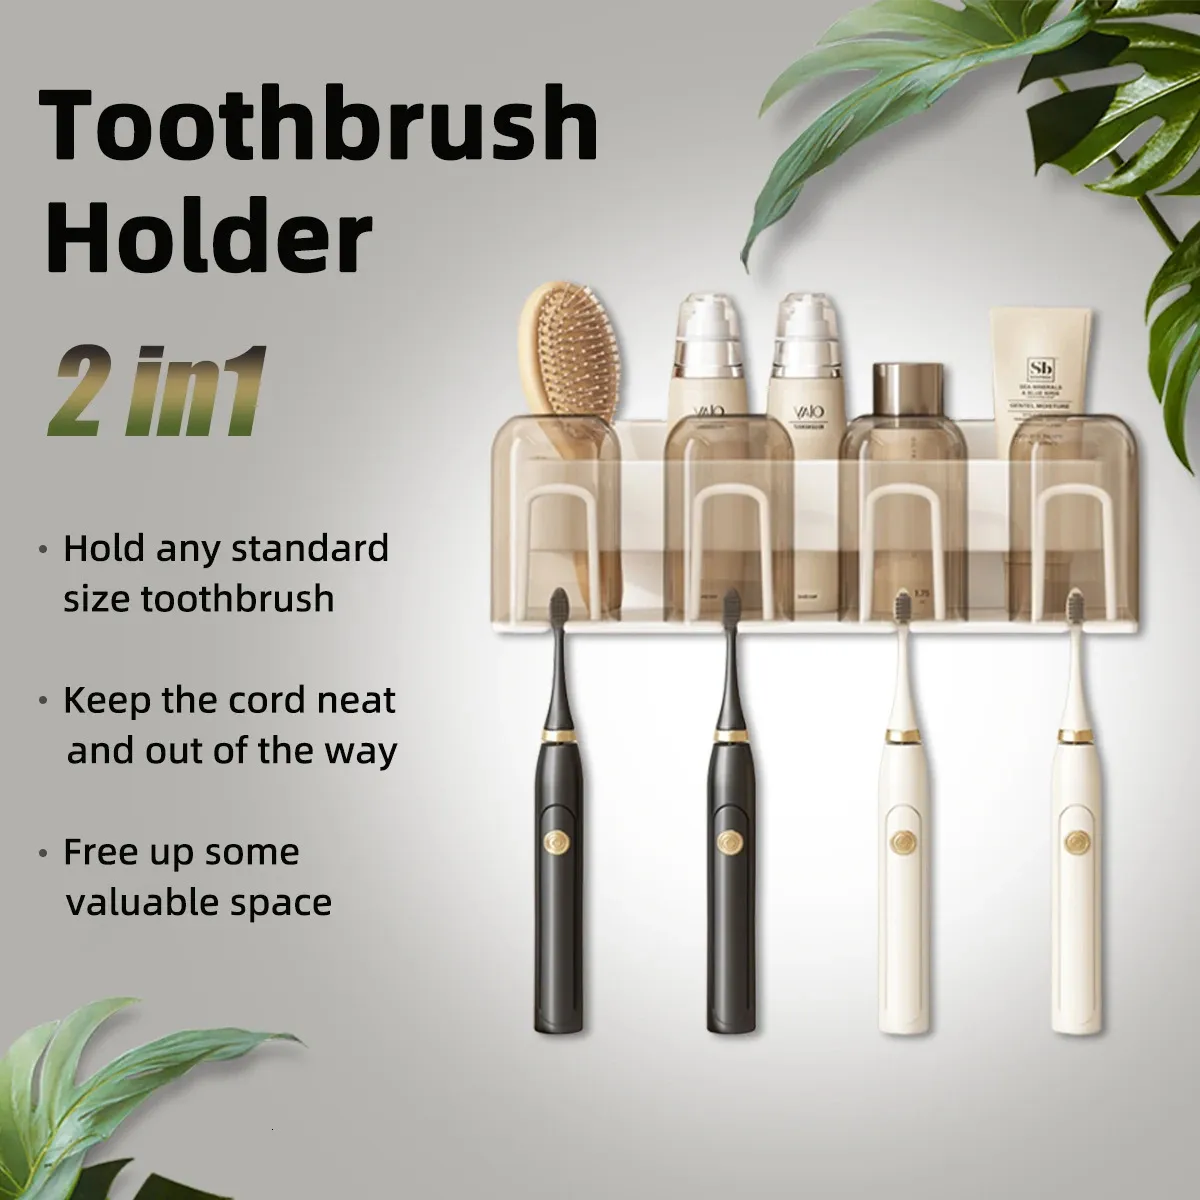 Bathroom Shelves Aluminum Alloy Toothbrush Holder Without Drilling Mouthwash Cup Wall Mounted Shelf Accessories 231216